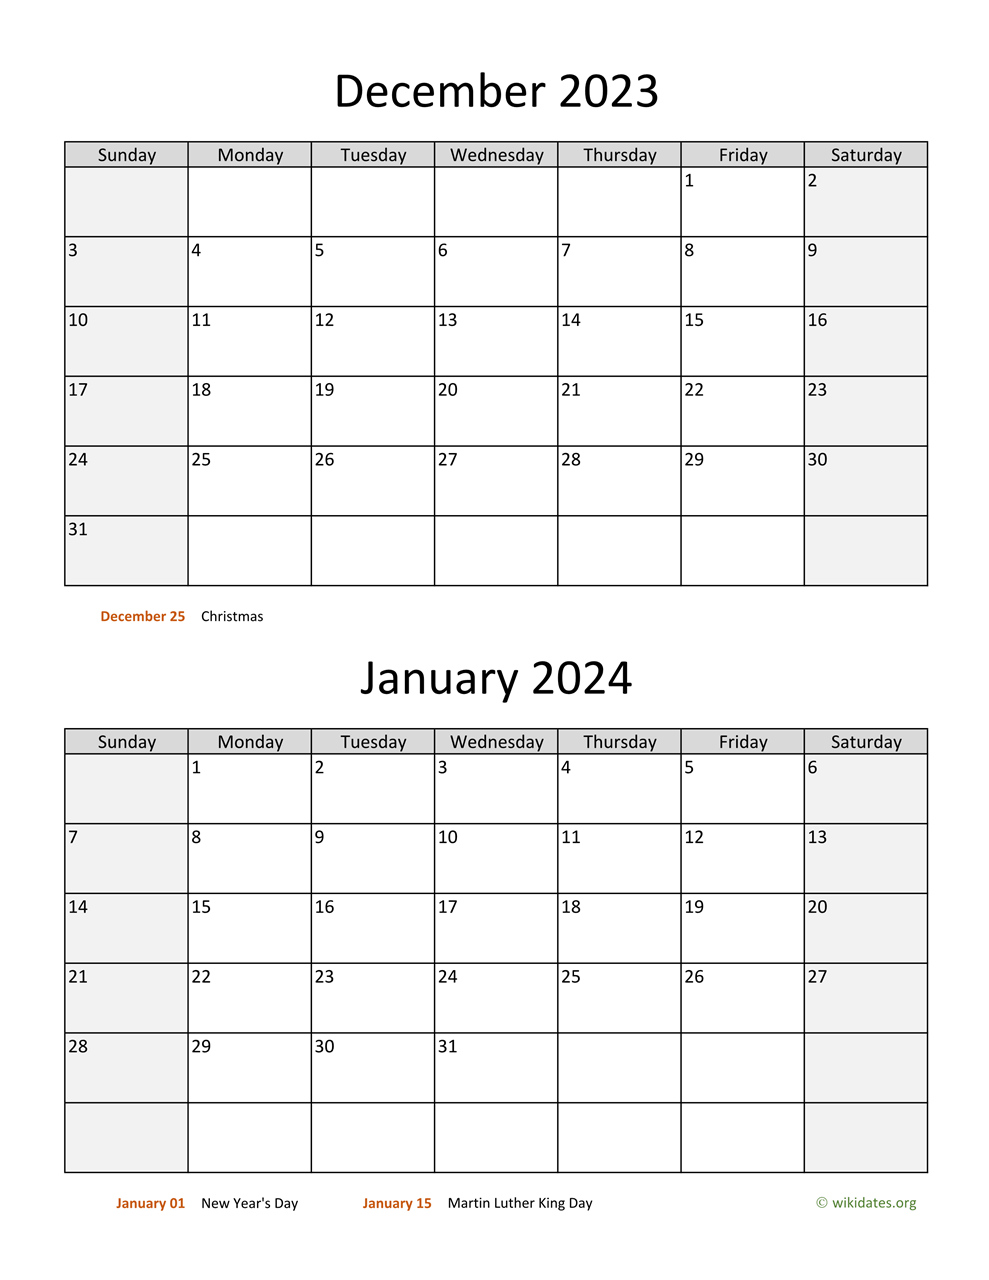 December 2023 And January 2024 Calendar | Wikidates for December 2023 And January 2024 Calendar Printable